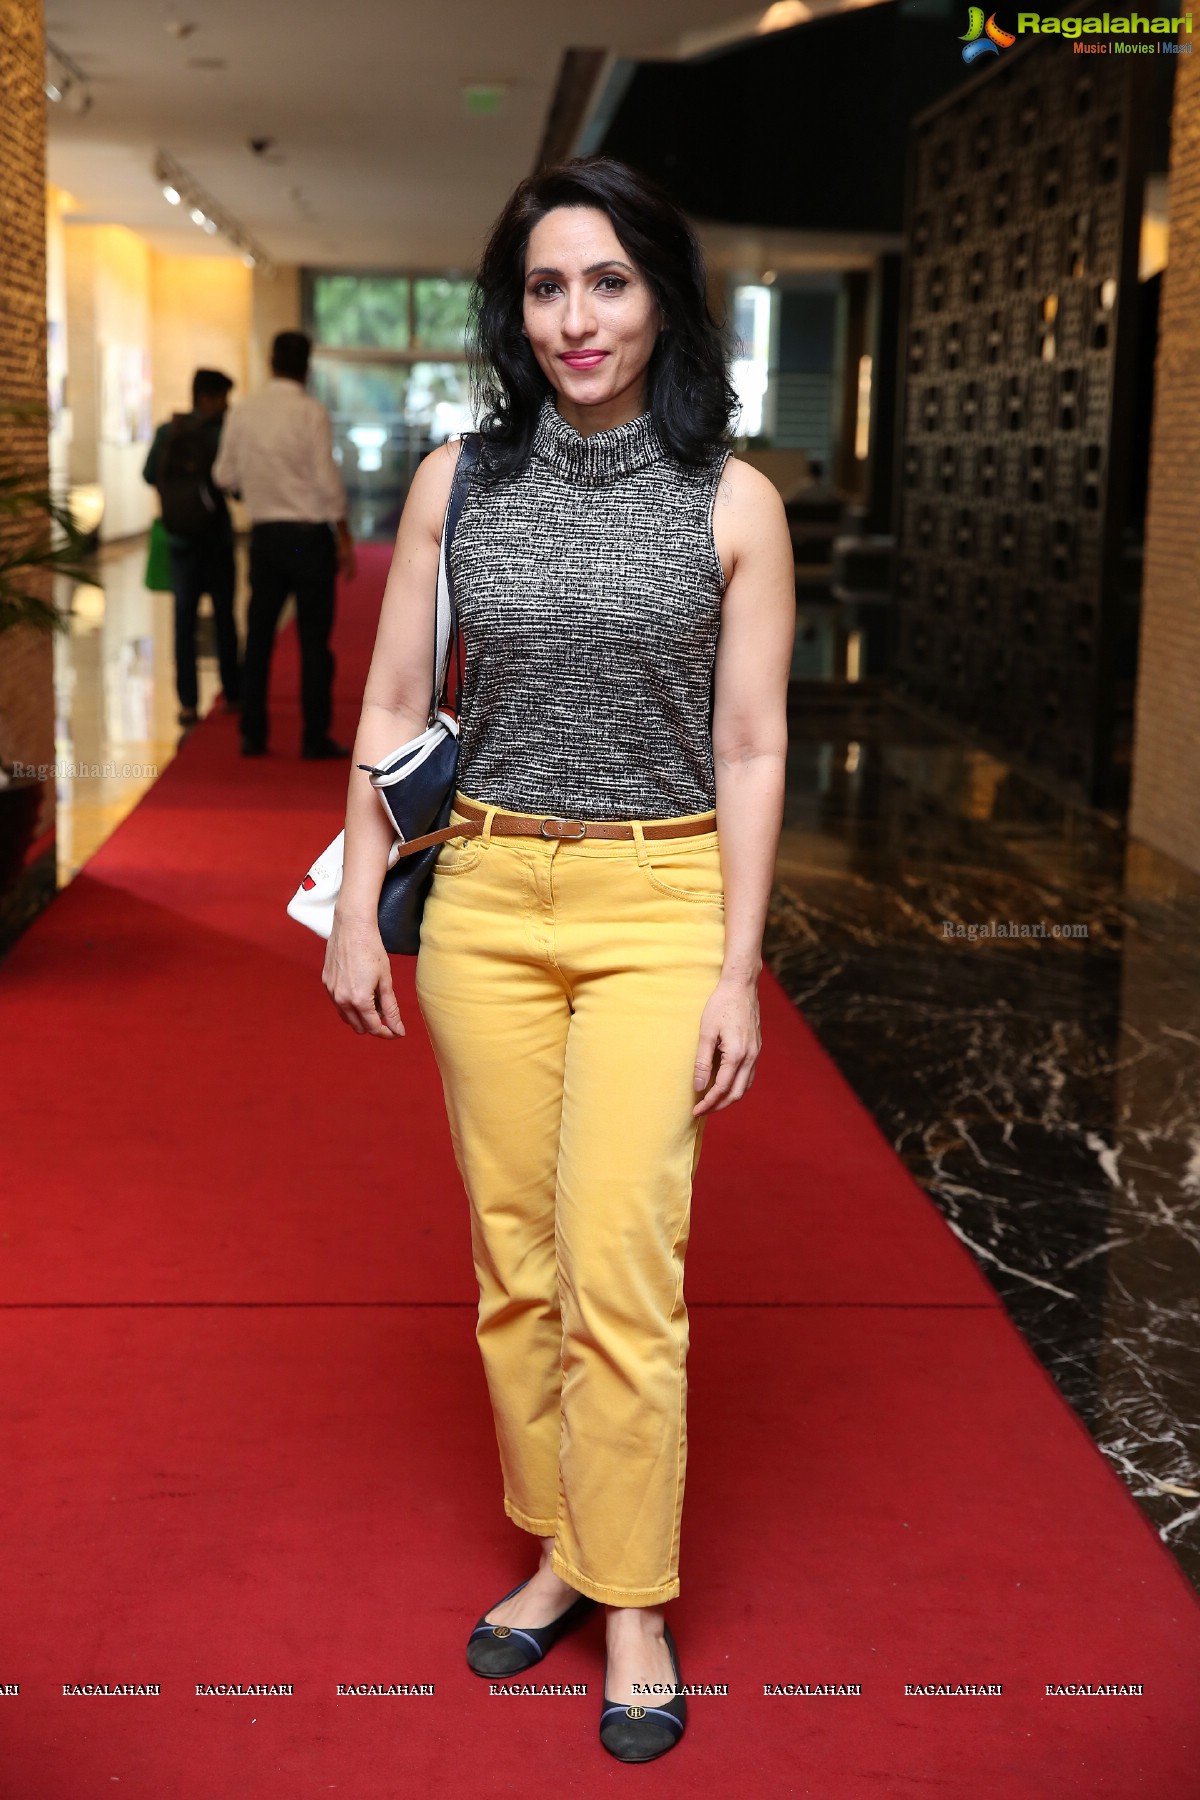 Swathi Deekshith launches Akritti Exhibition and Sale at Park Hyatt